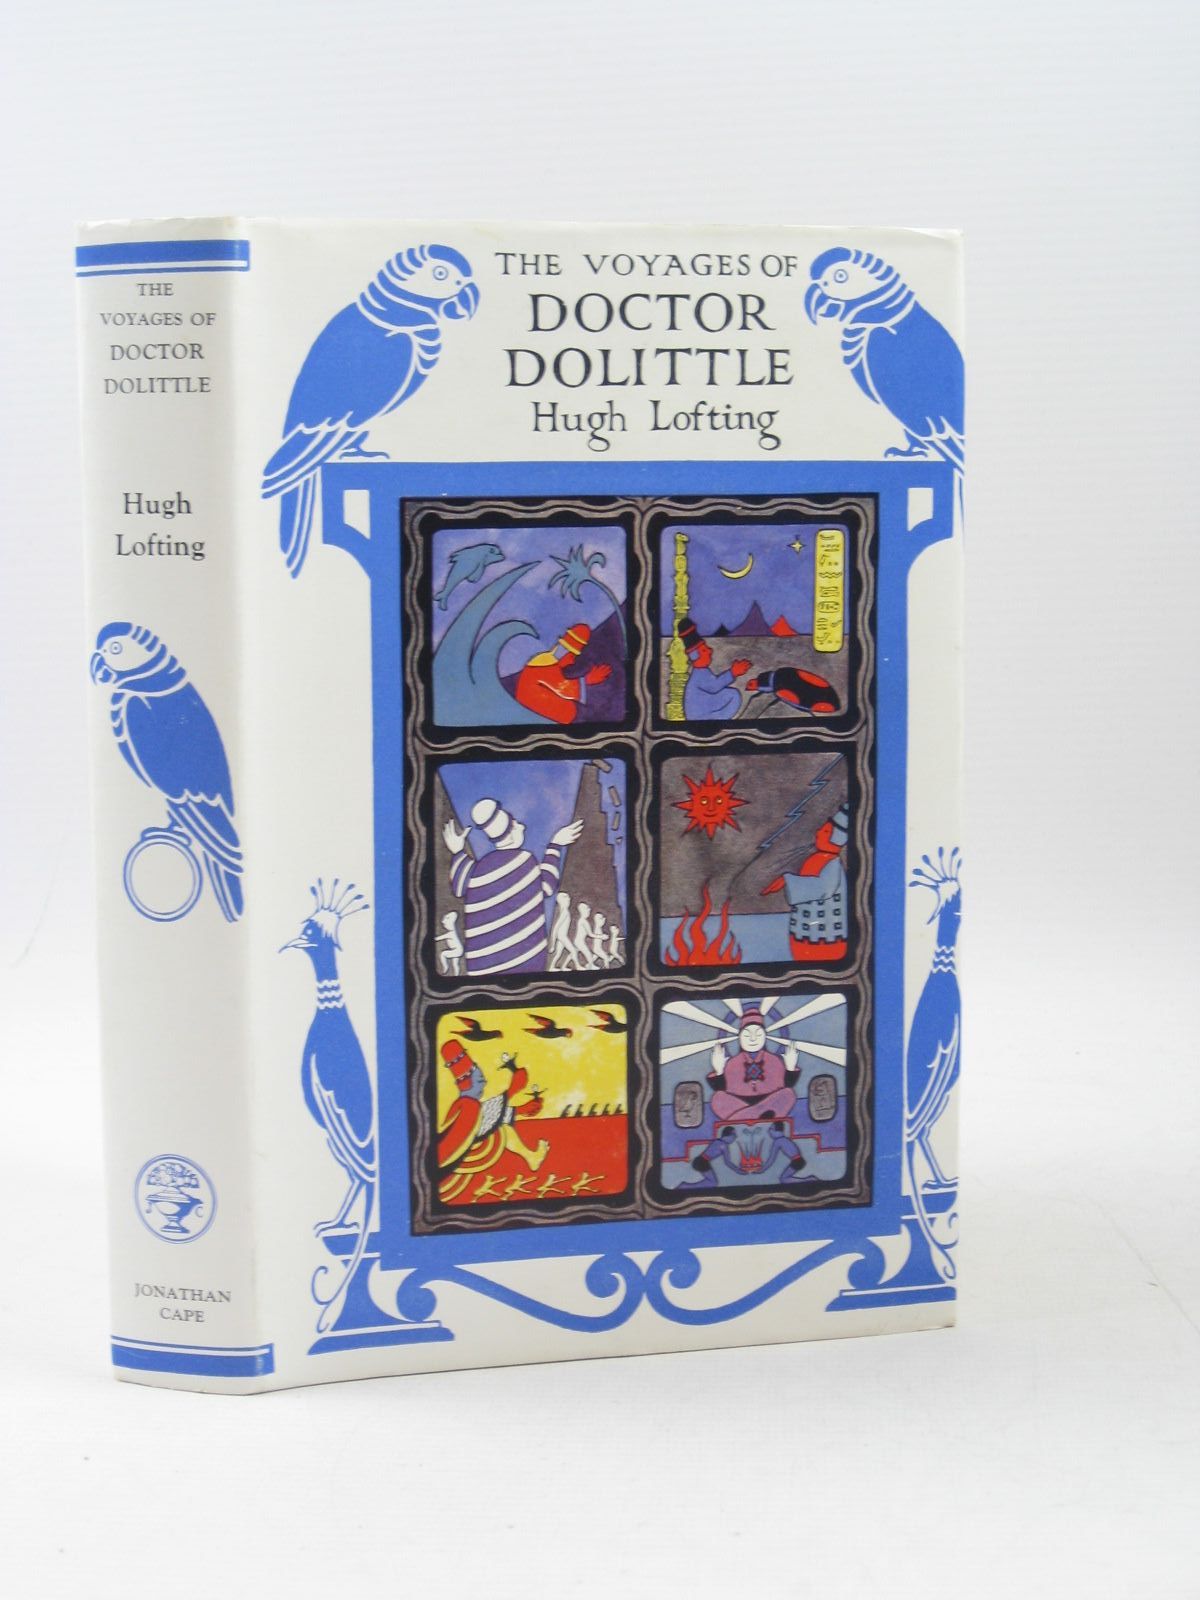 Cover of THE VOYAGES OF DOCTOR DOLITTLE by Hugh Lofting